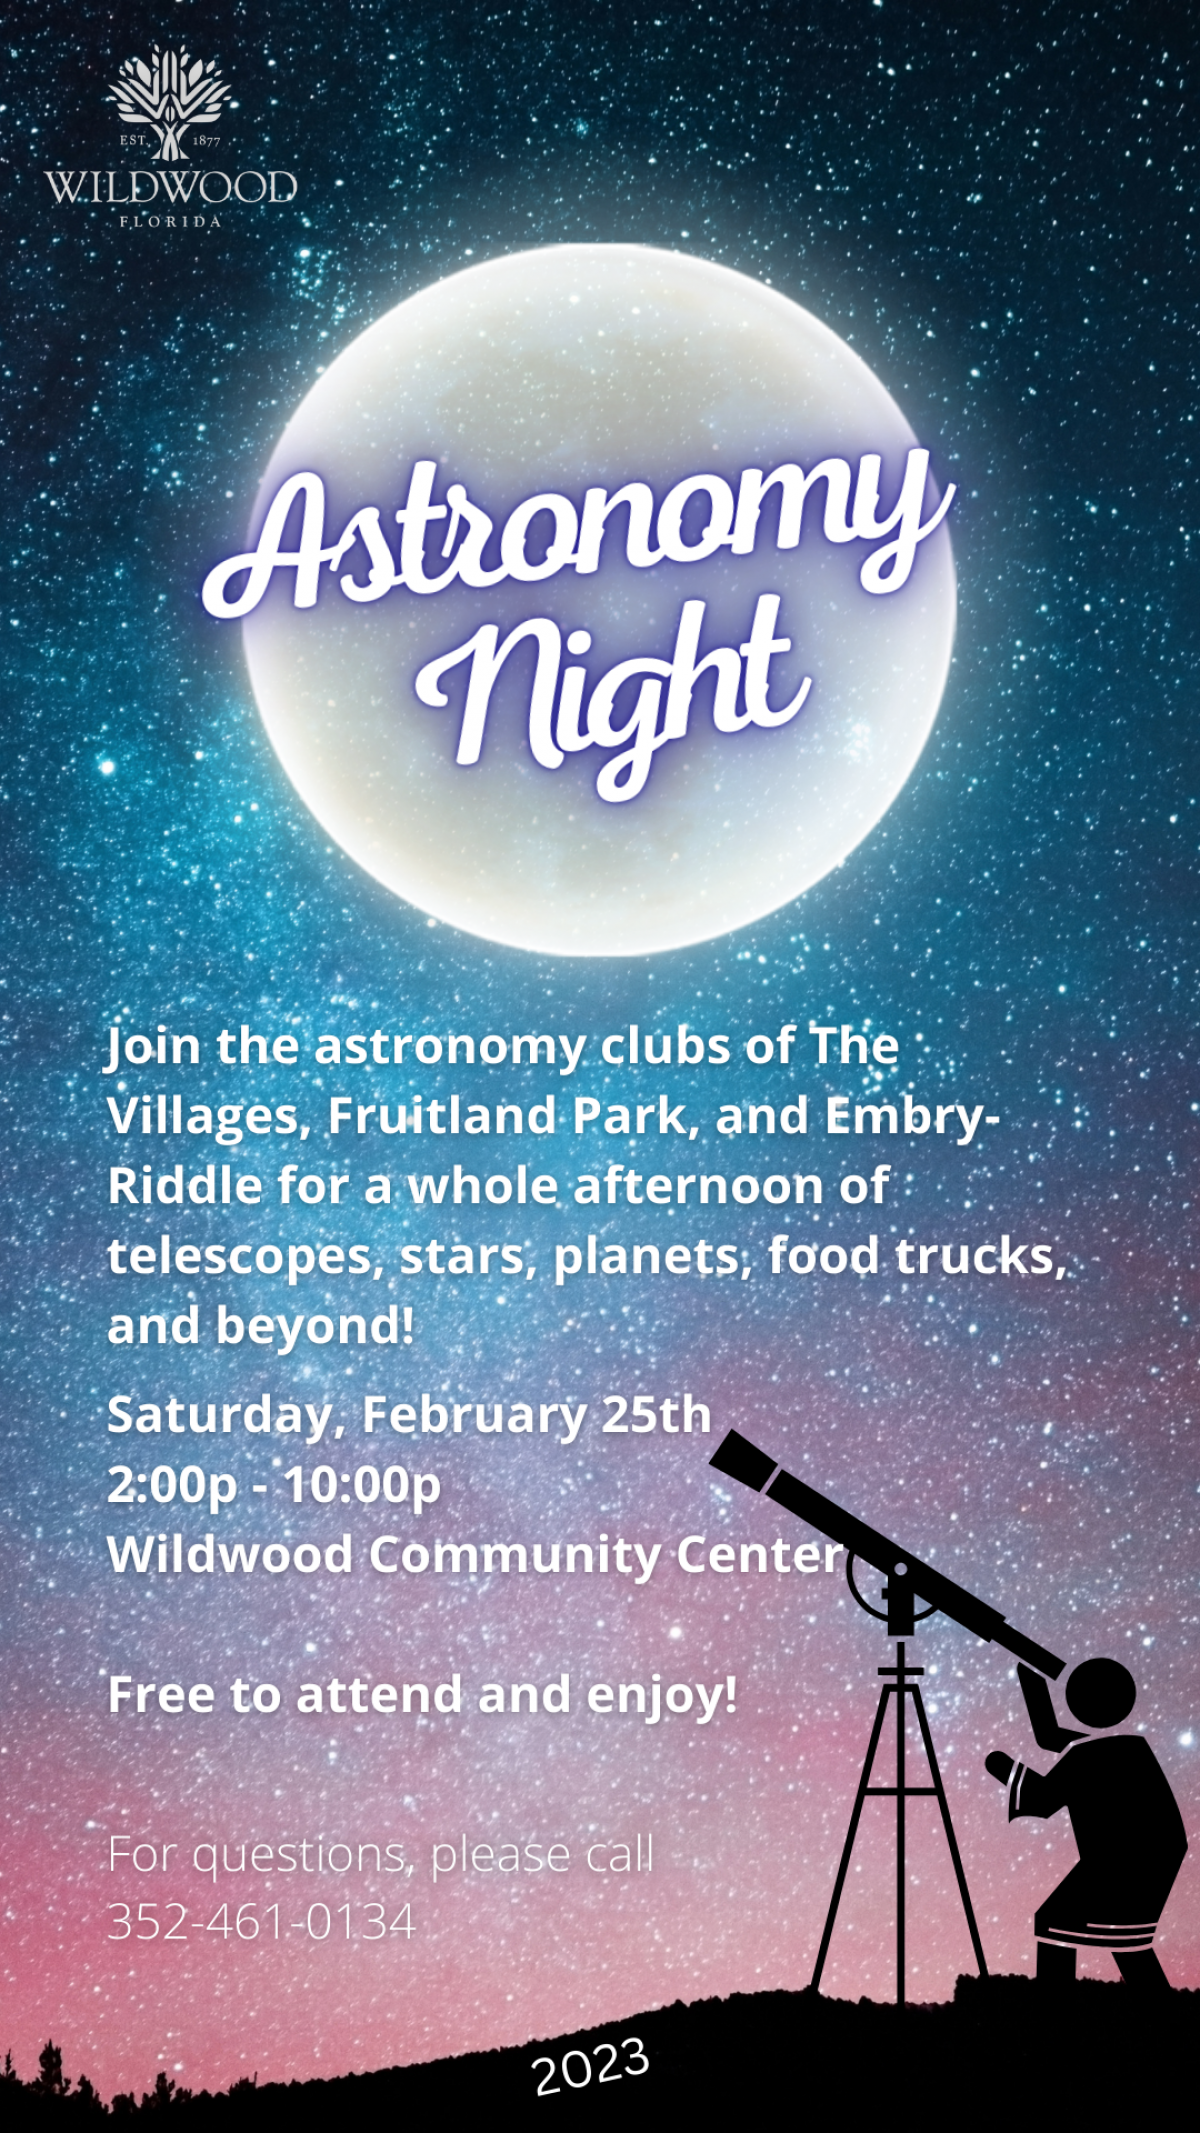 Astronomy Night - February 25th at 2pm